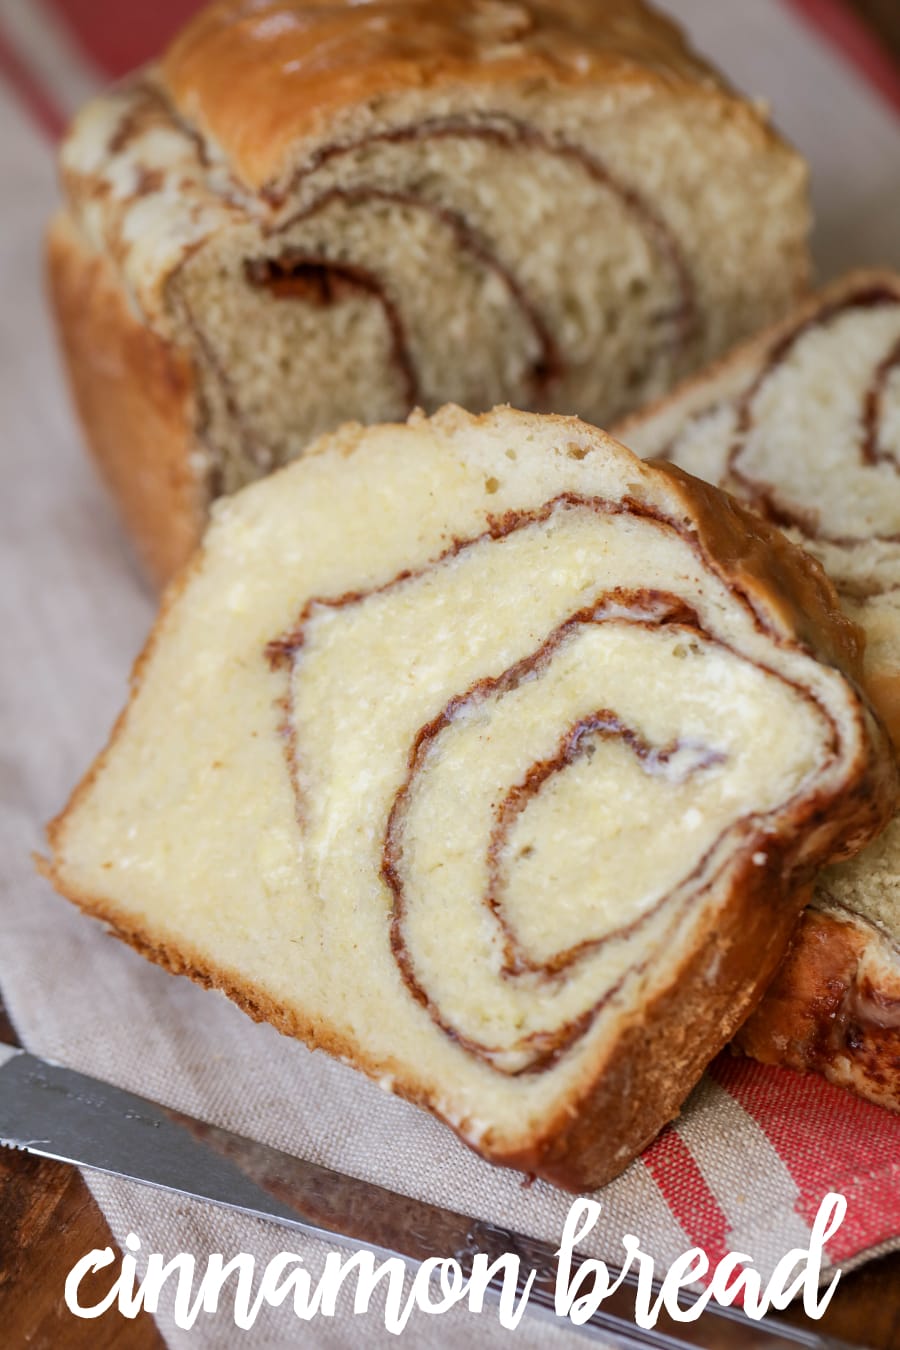 The BEST Cinnamon Bread recipe ever! So soft! This will be gone in minutes!